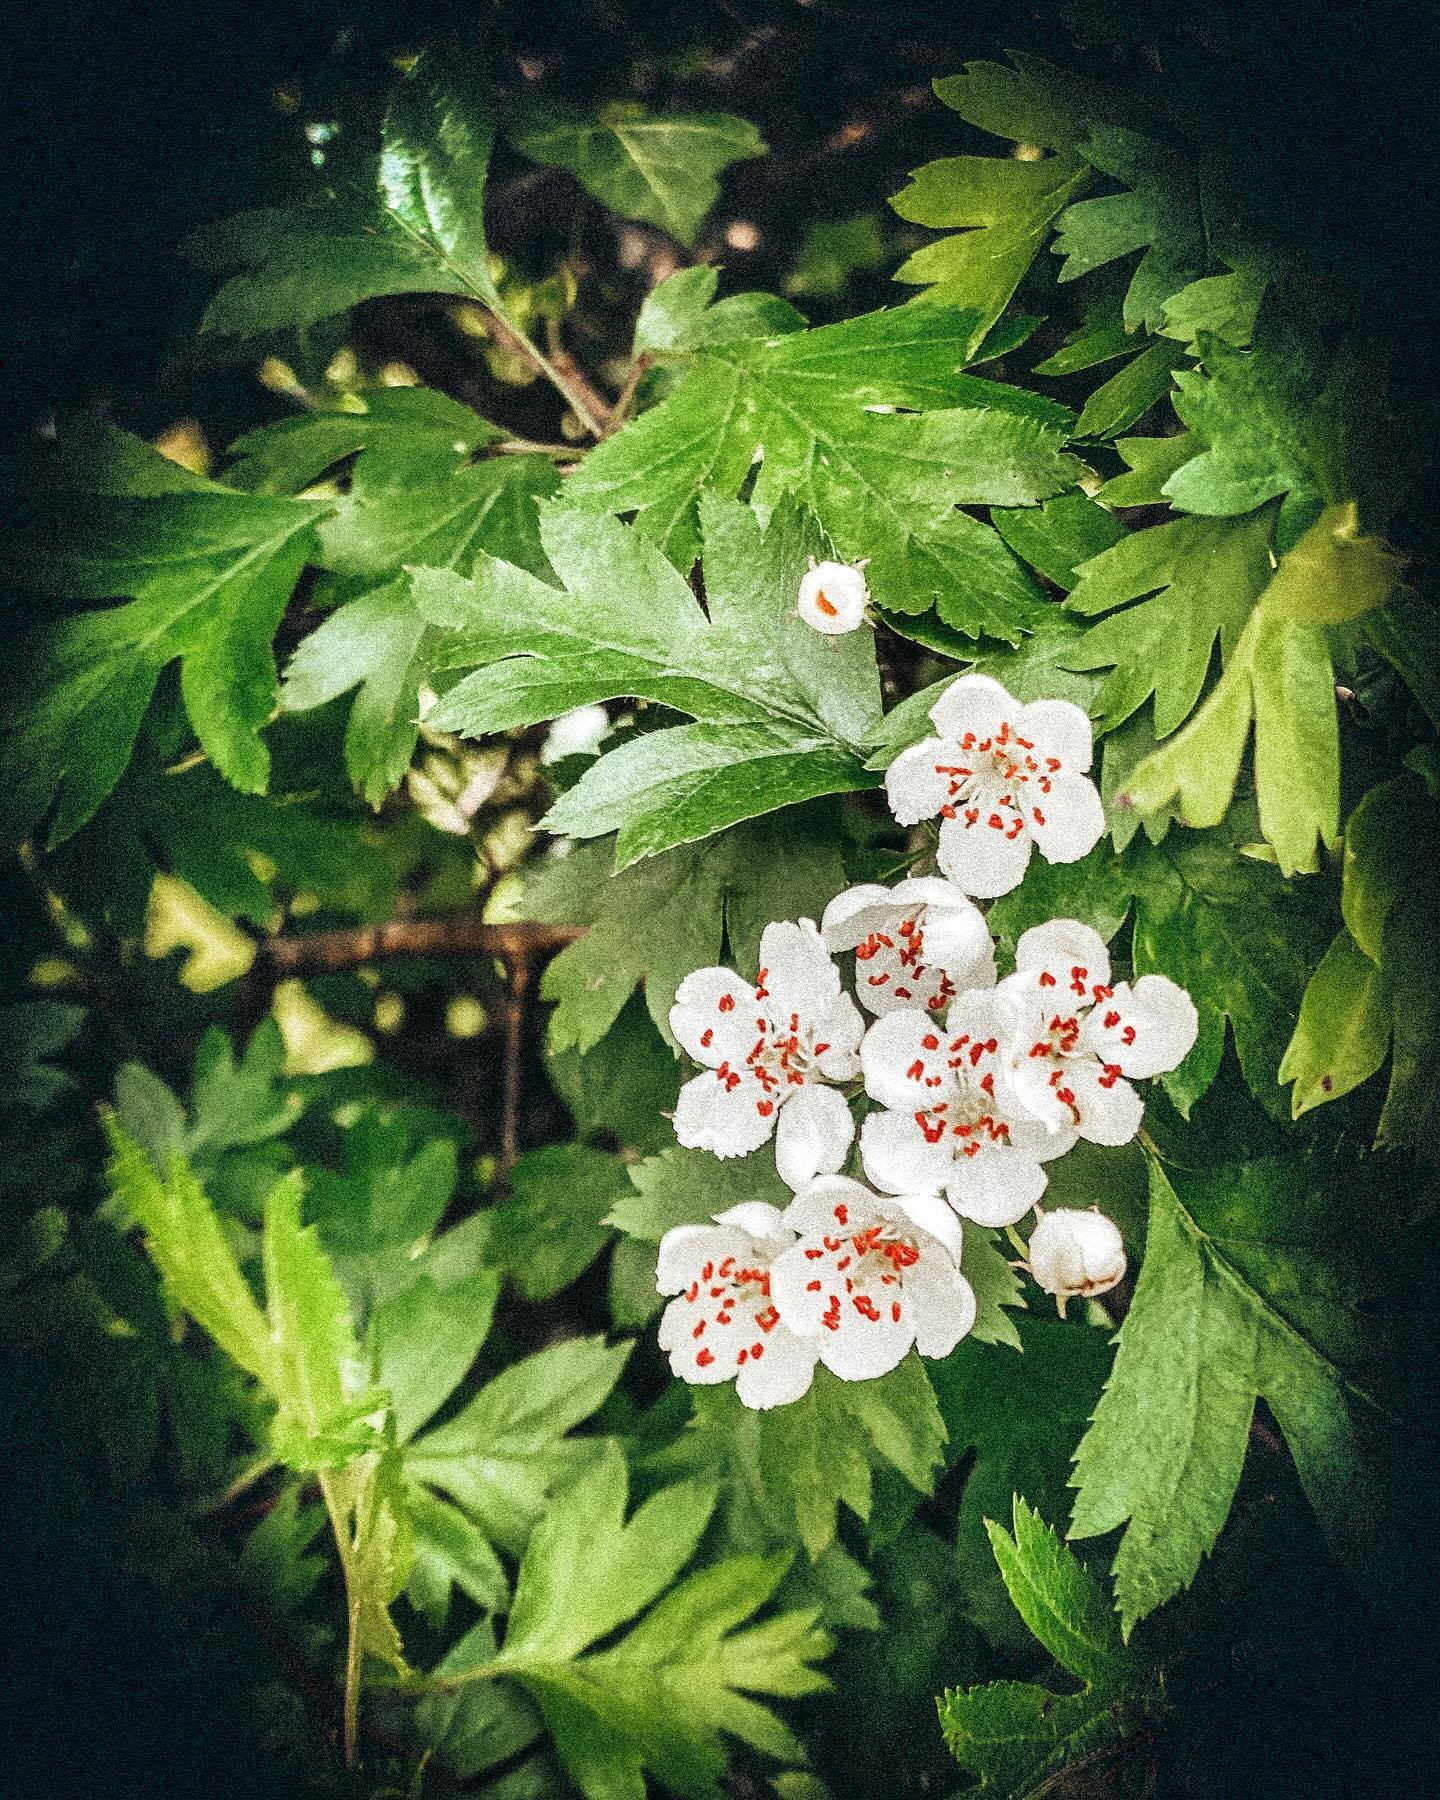 The first blossom from my Hawthorn hedge, out this morning, a Beltane blessing for sure. Such a strange shift from one month to the next this year. The weather is slow to change and I think many of us are feeling the same. 

In circle last night we w